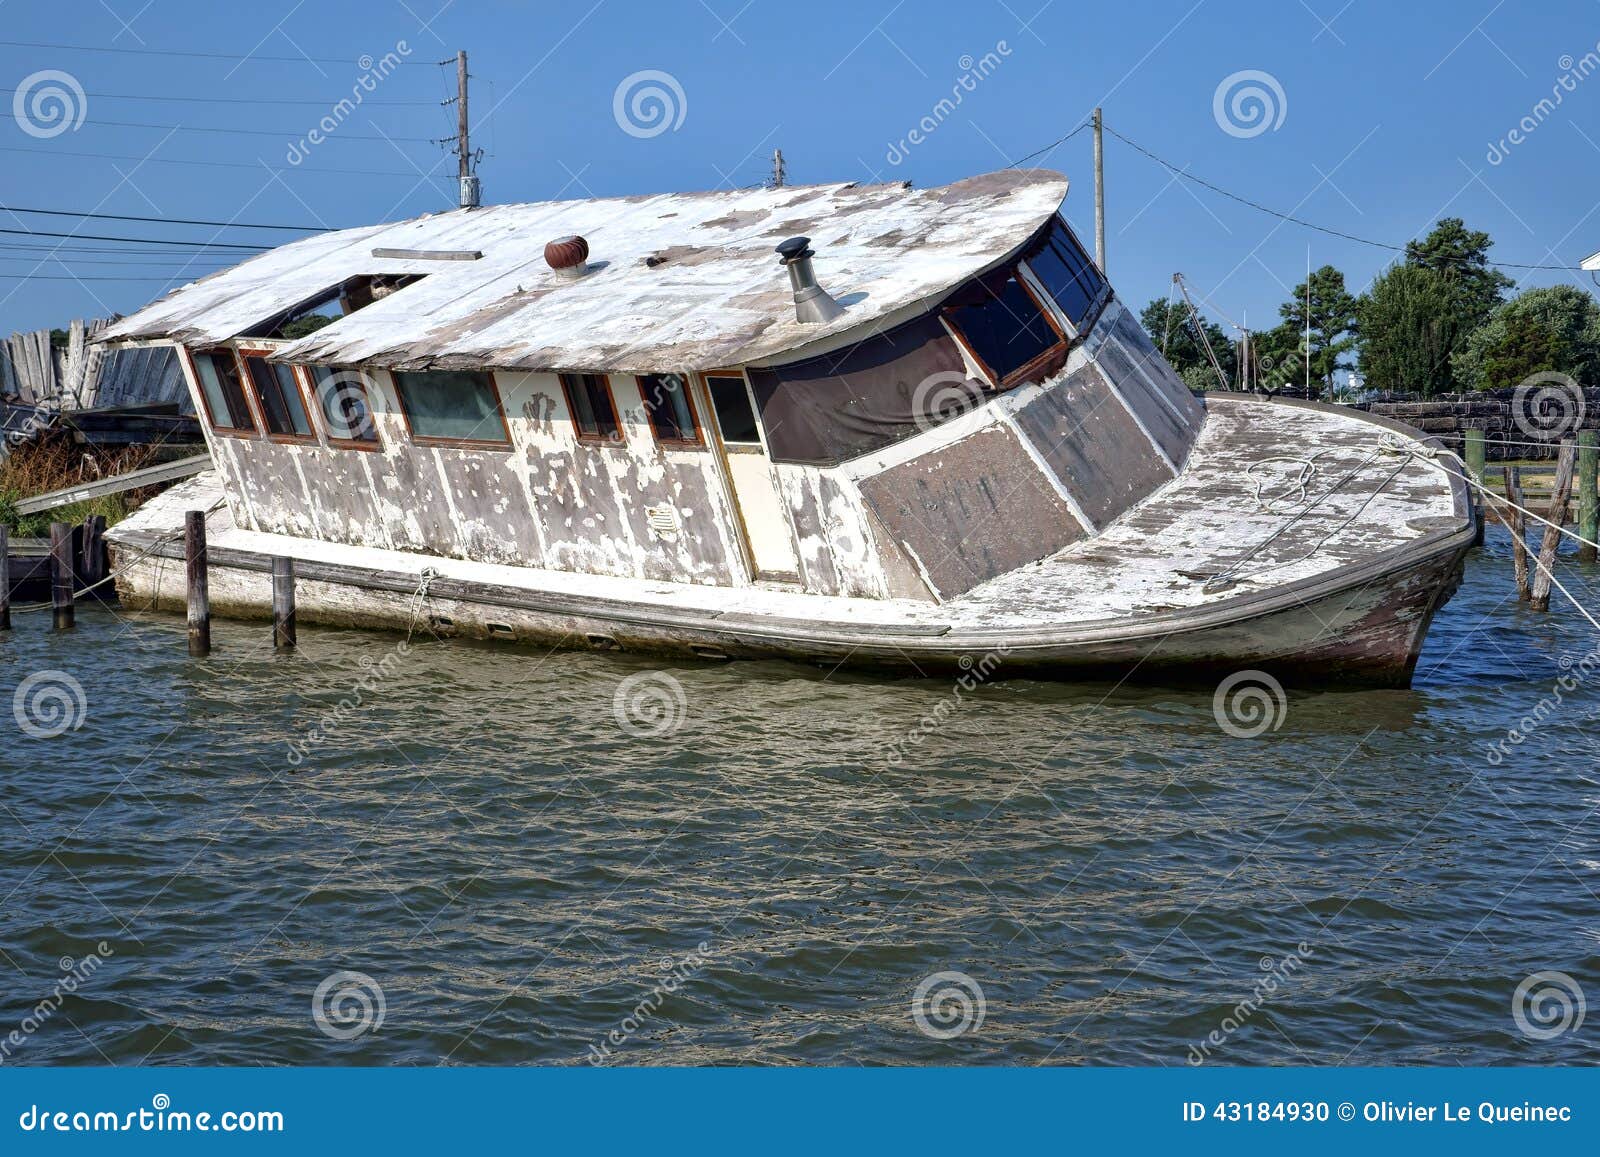 Abandoned Derelict Boat Sinking After Hurricane Stock 